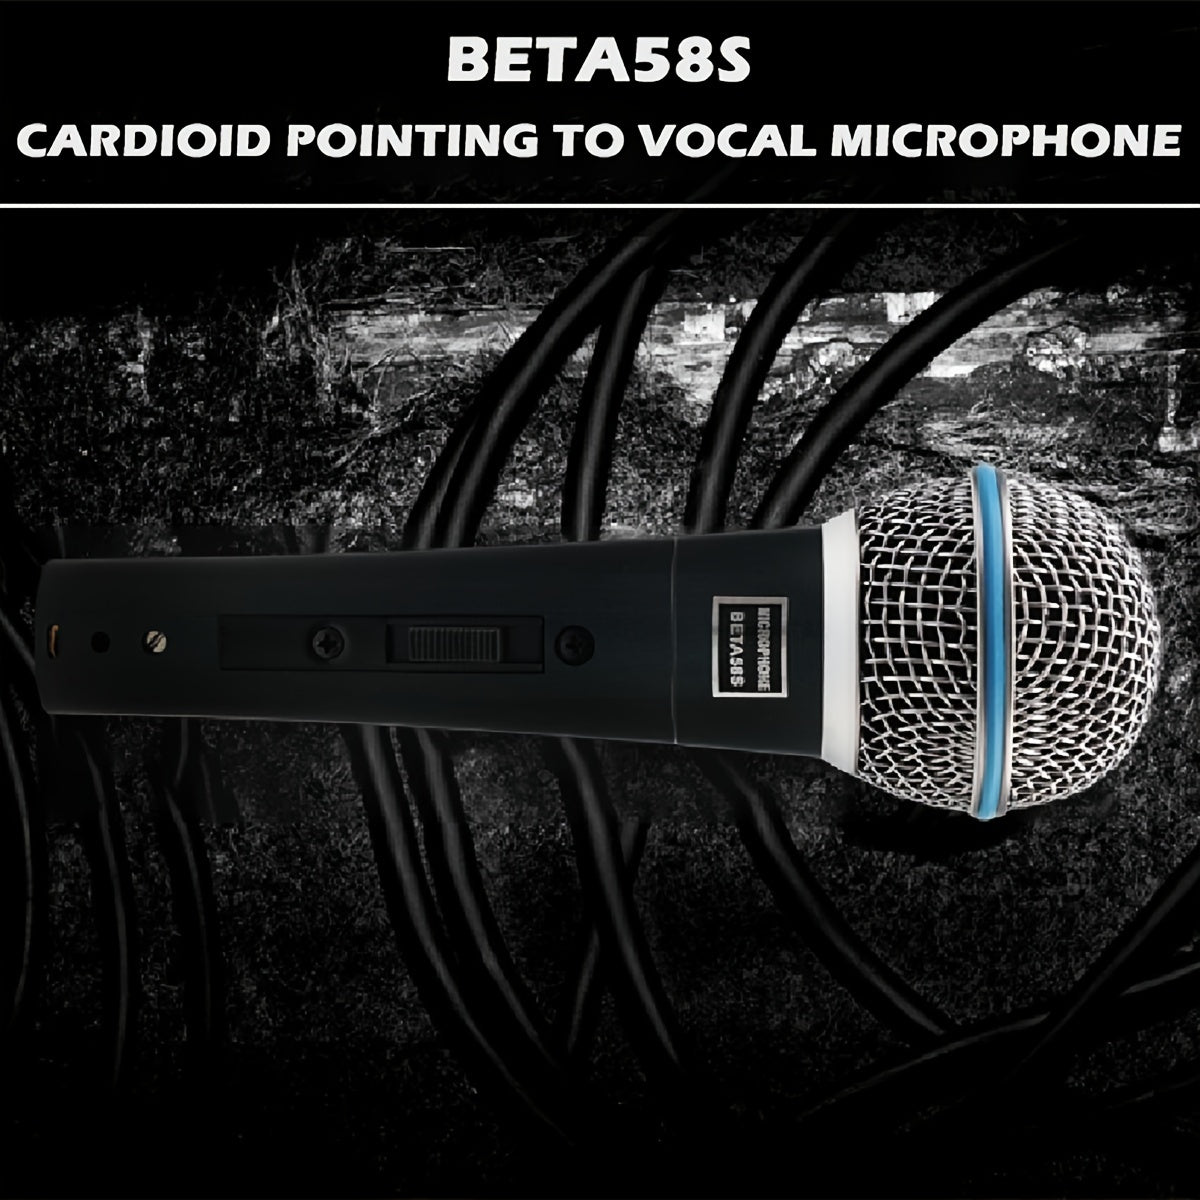 BETA58 Wired Microphone Black Paint Anti Rust Design Switch Metal Tube KTV Professional Outdoor Microphone